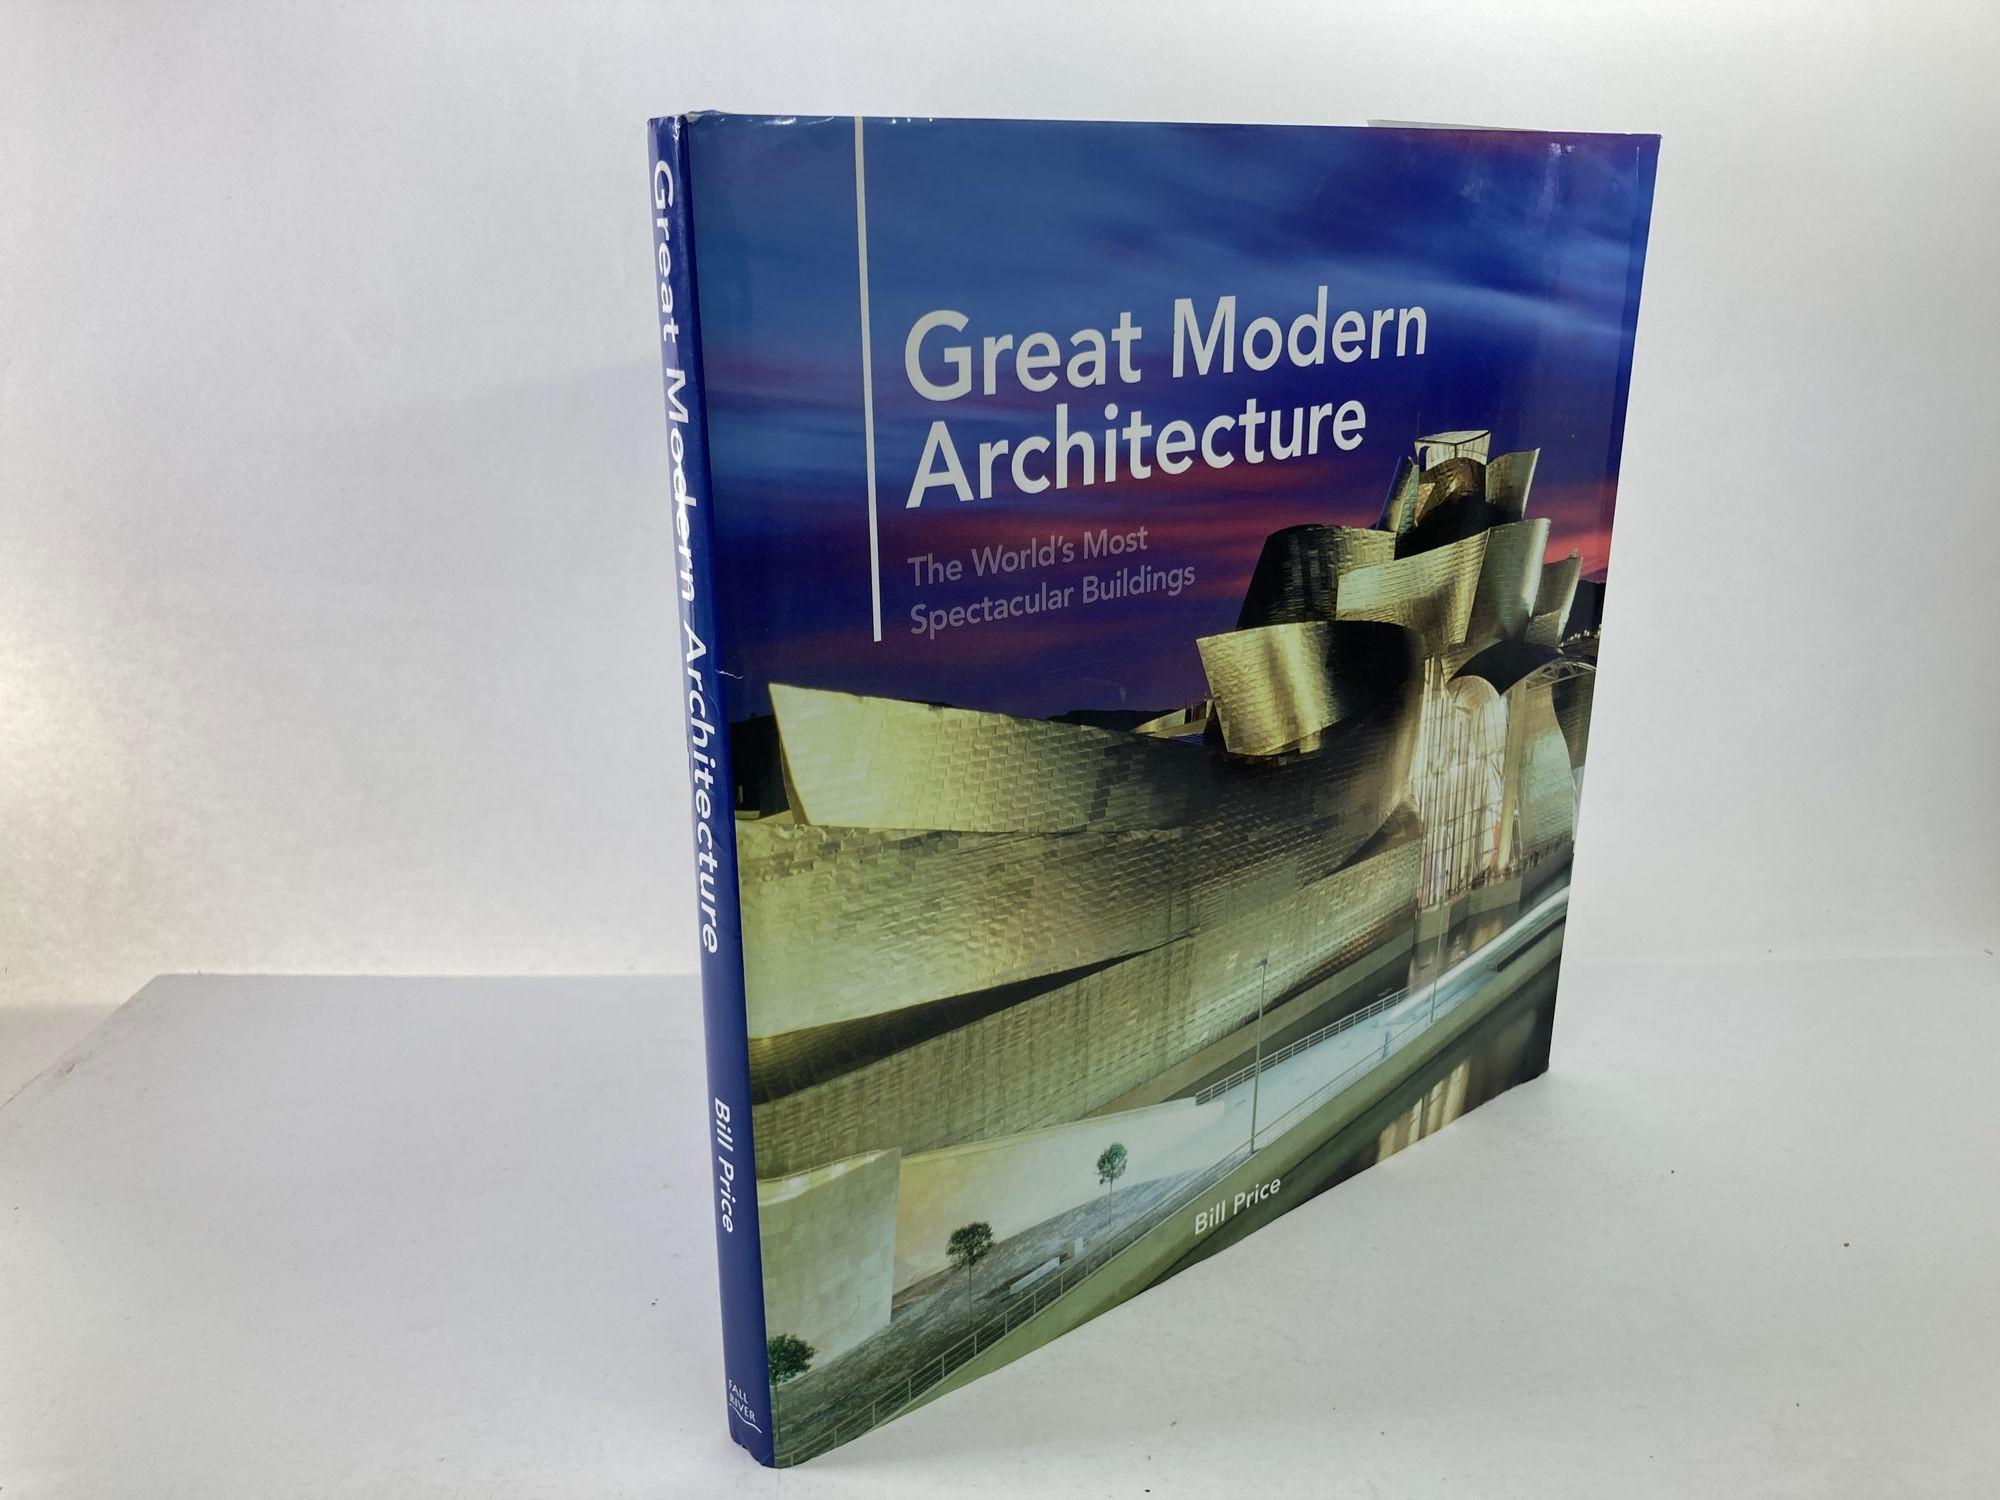 La grande architecture moderne : The World's Most Spectacar Buildings Hardcover - January 1, 2009 by Bill Price.From the Publisher 